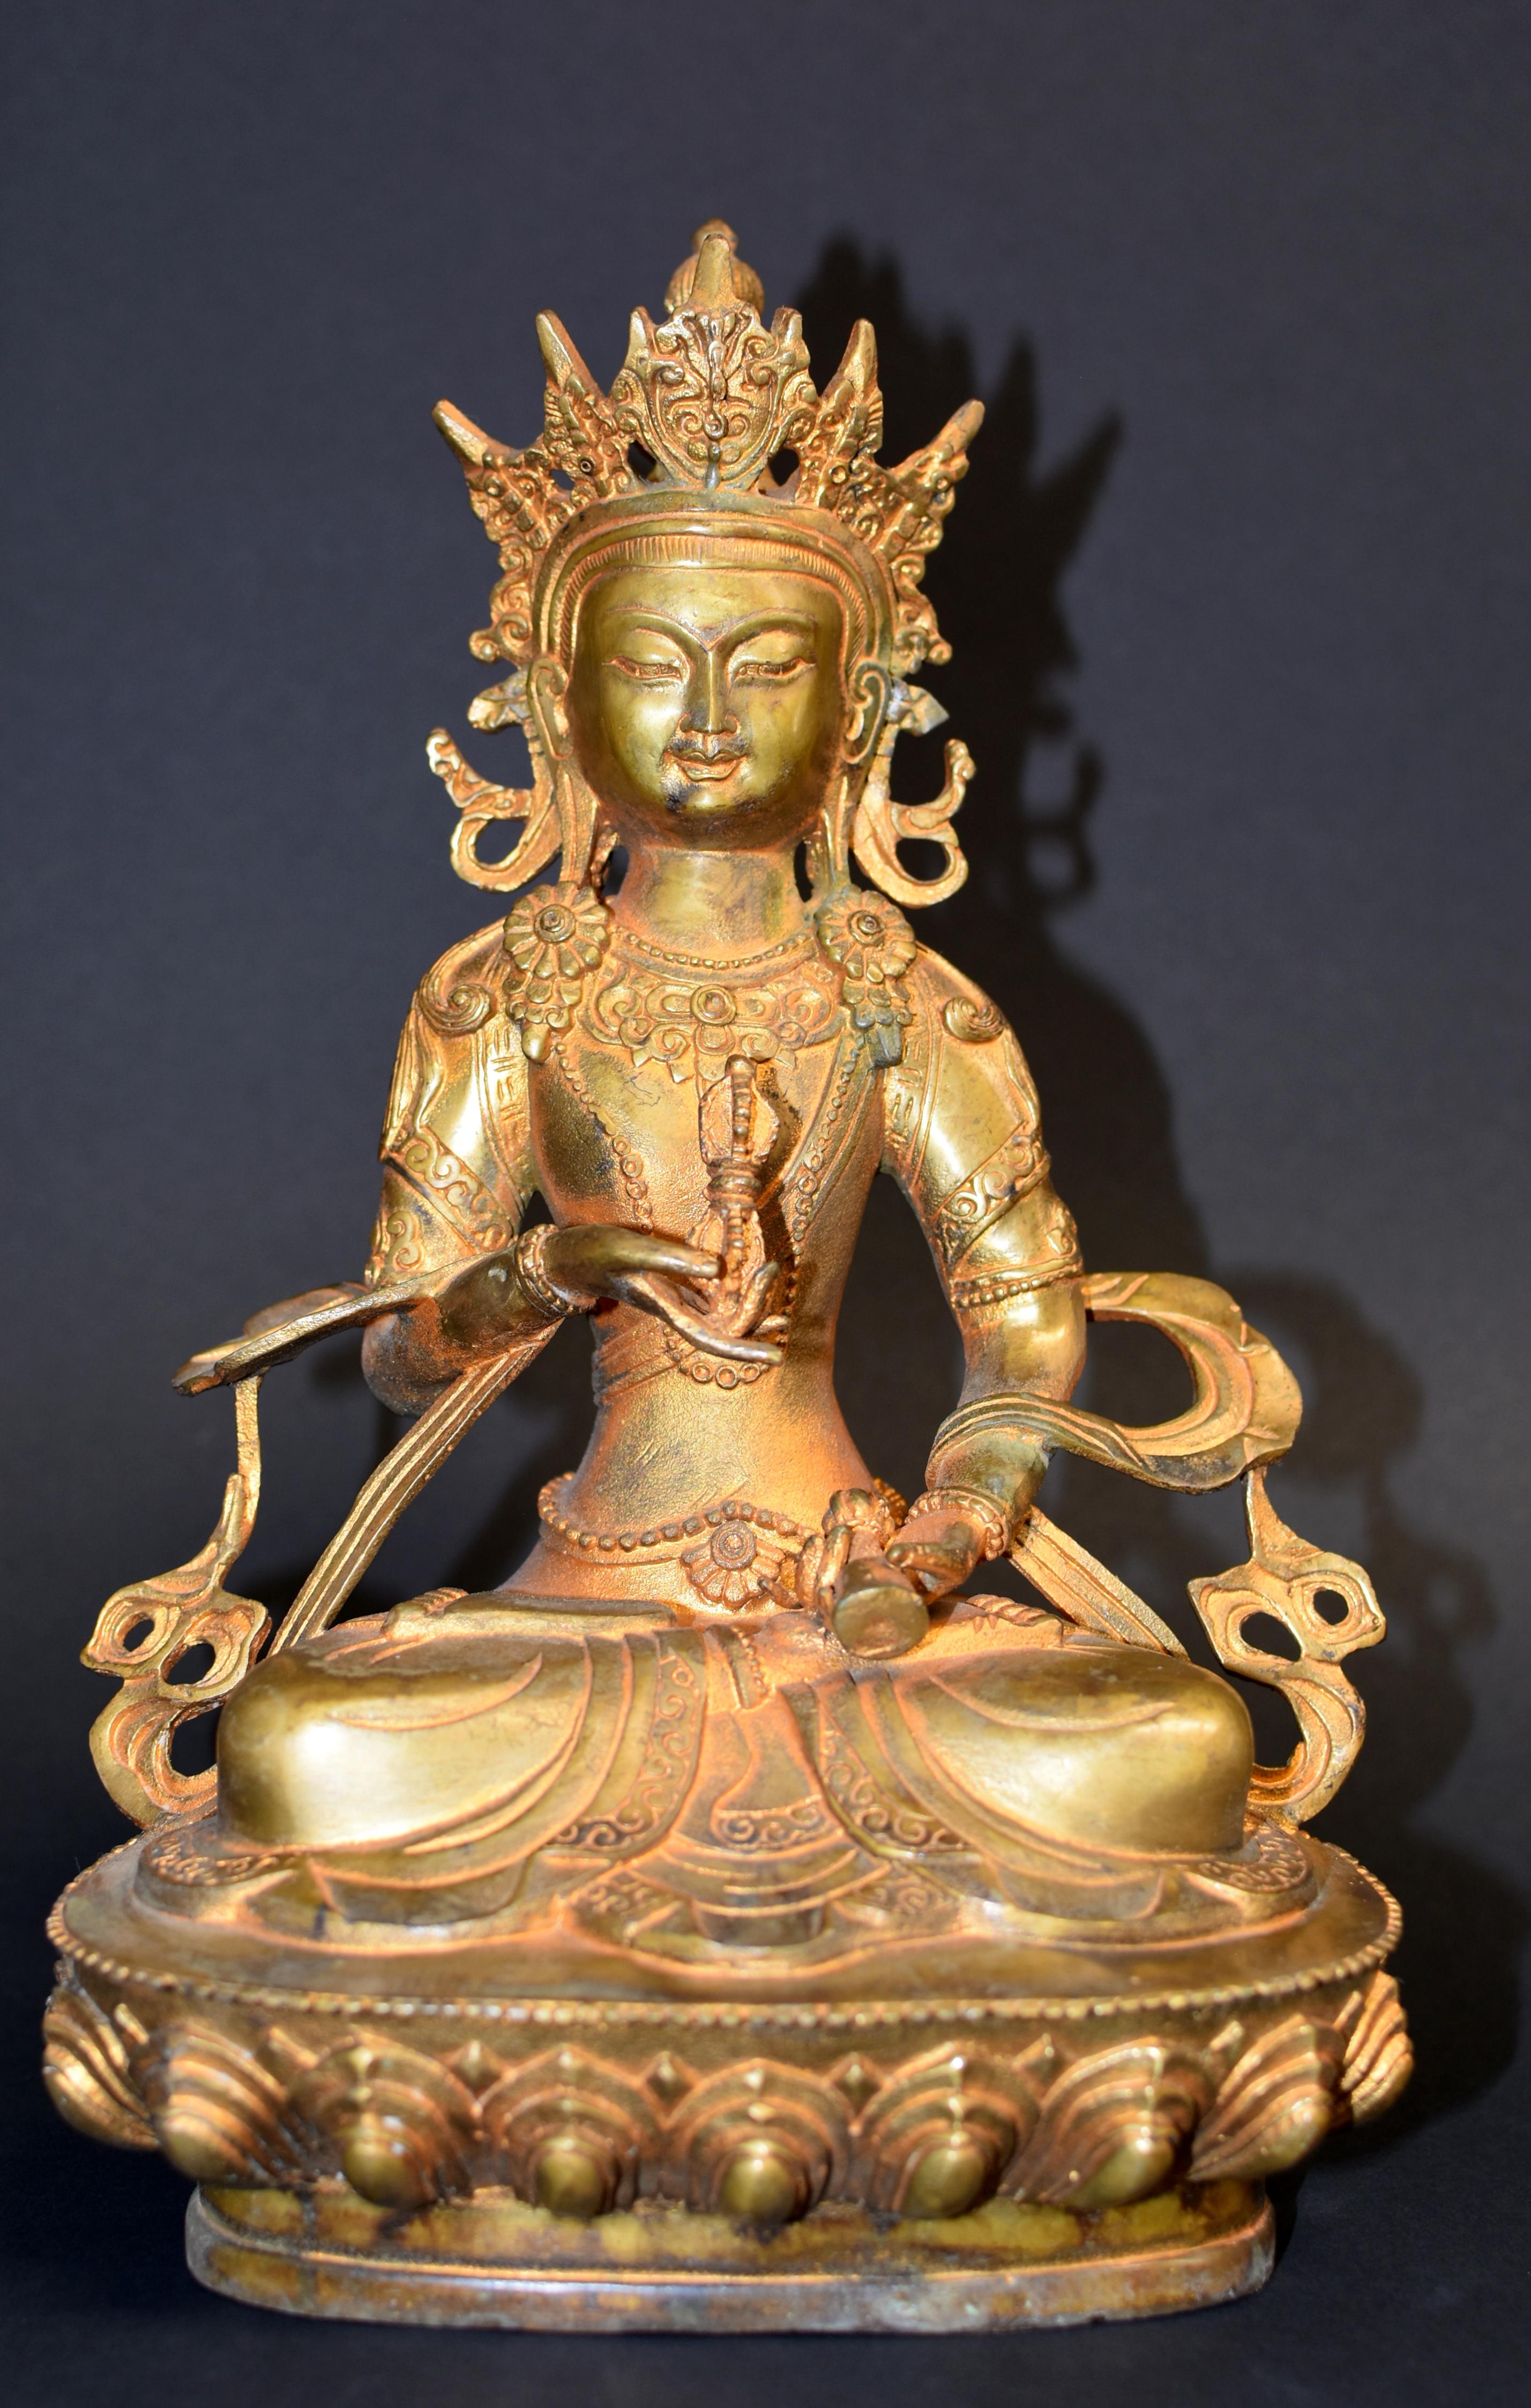 A beautiful 20th century statue of Tibetan Bodhisattva Vajrassatva. The Vajrassatva is a deity who removes bad karma, compels one's compassion and inspires strong devotion to prevent harm to others. Sitting pasmadana on a lotus throne, Buddha's